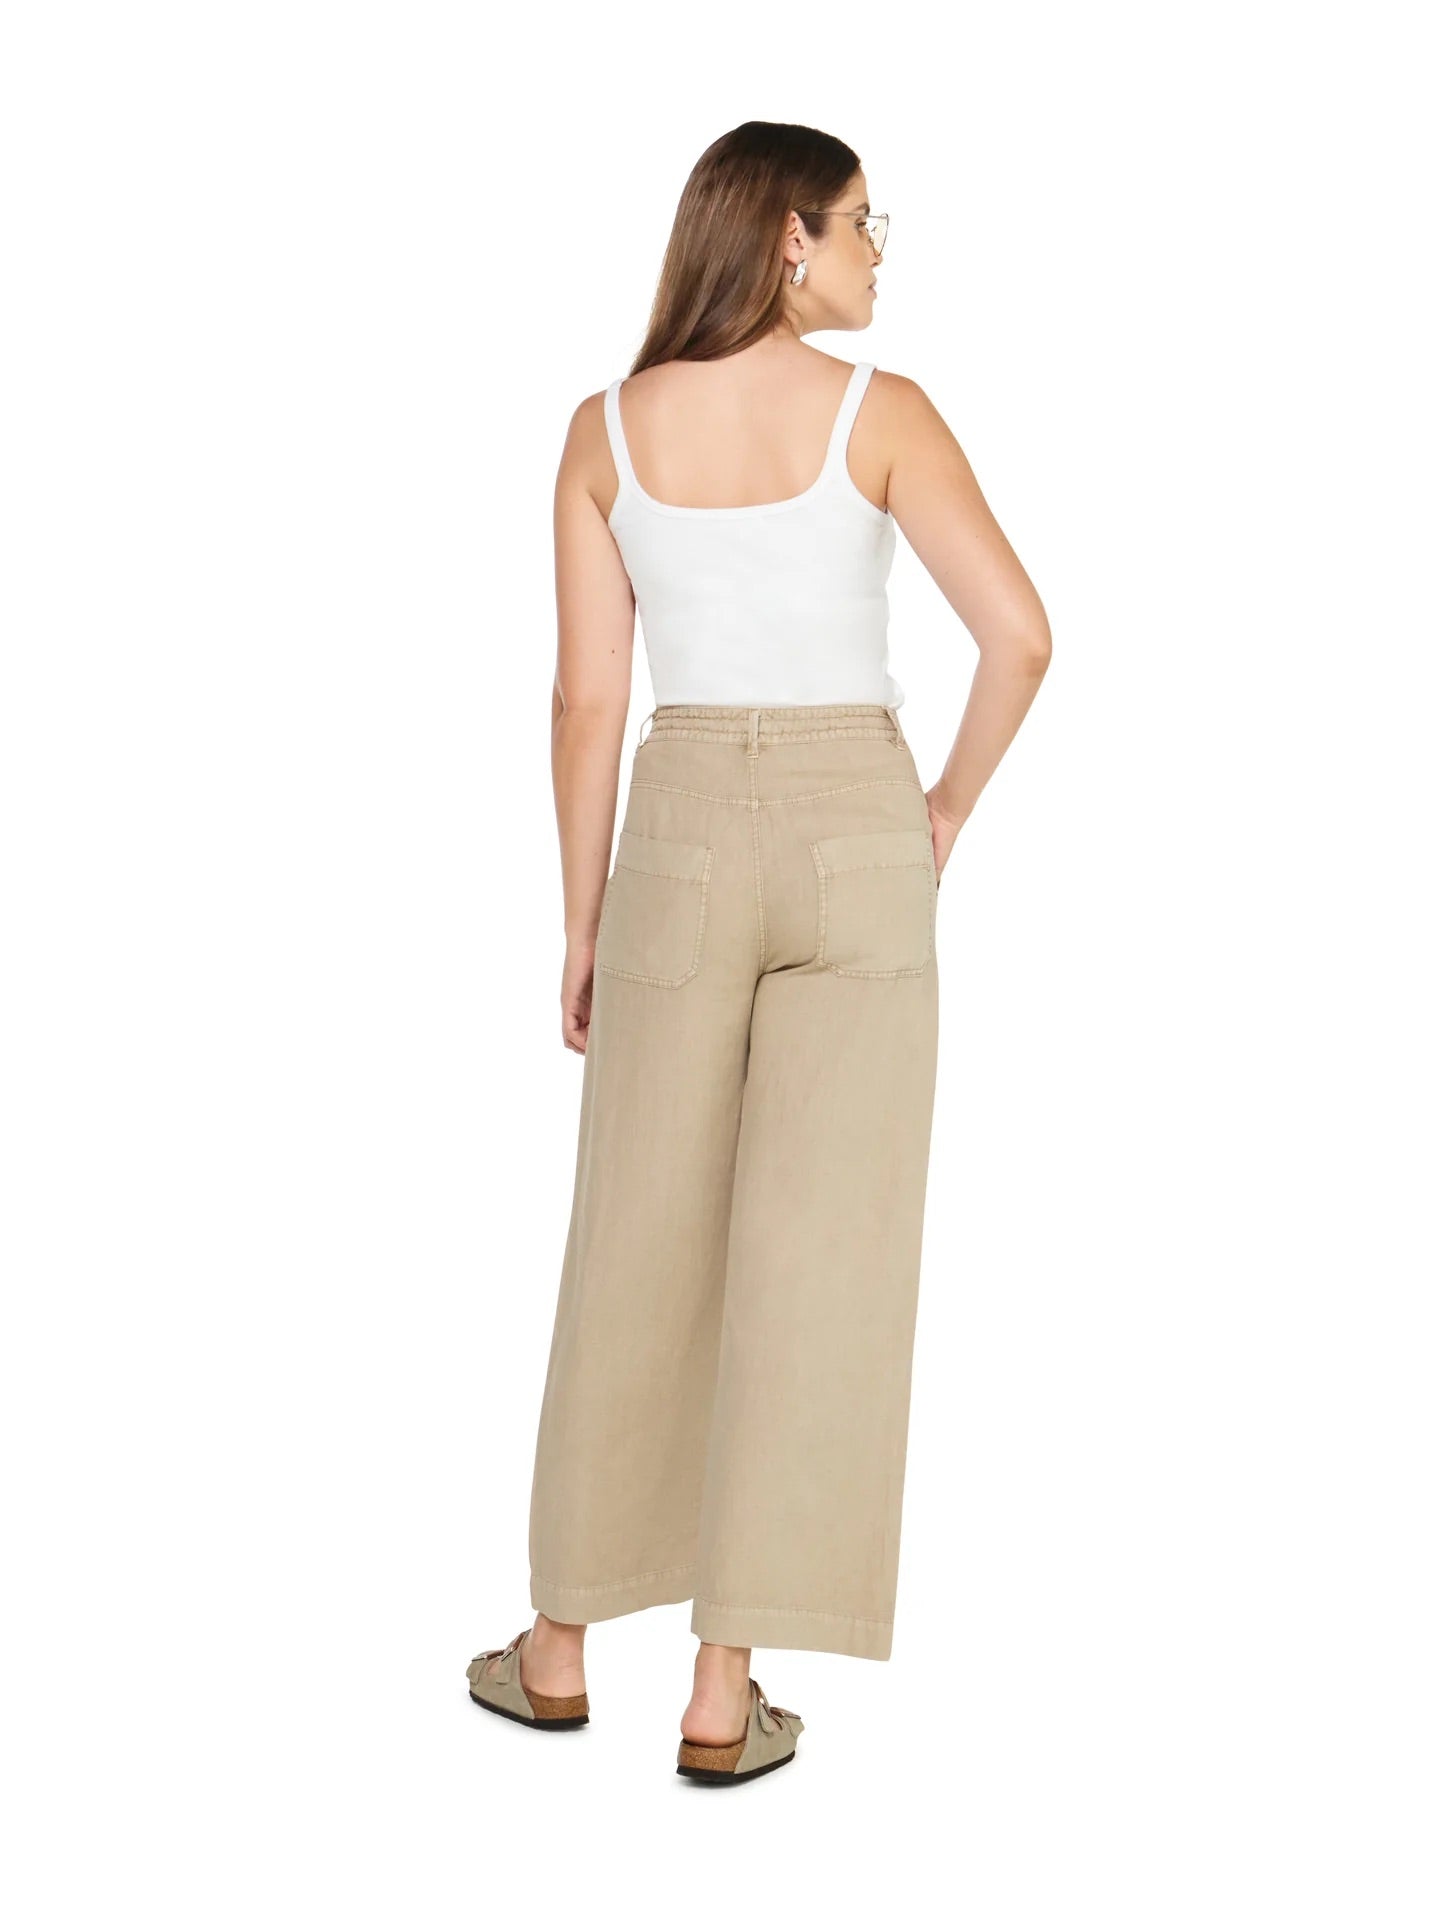 Articles of Society Linen Cargo Pants